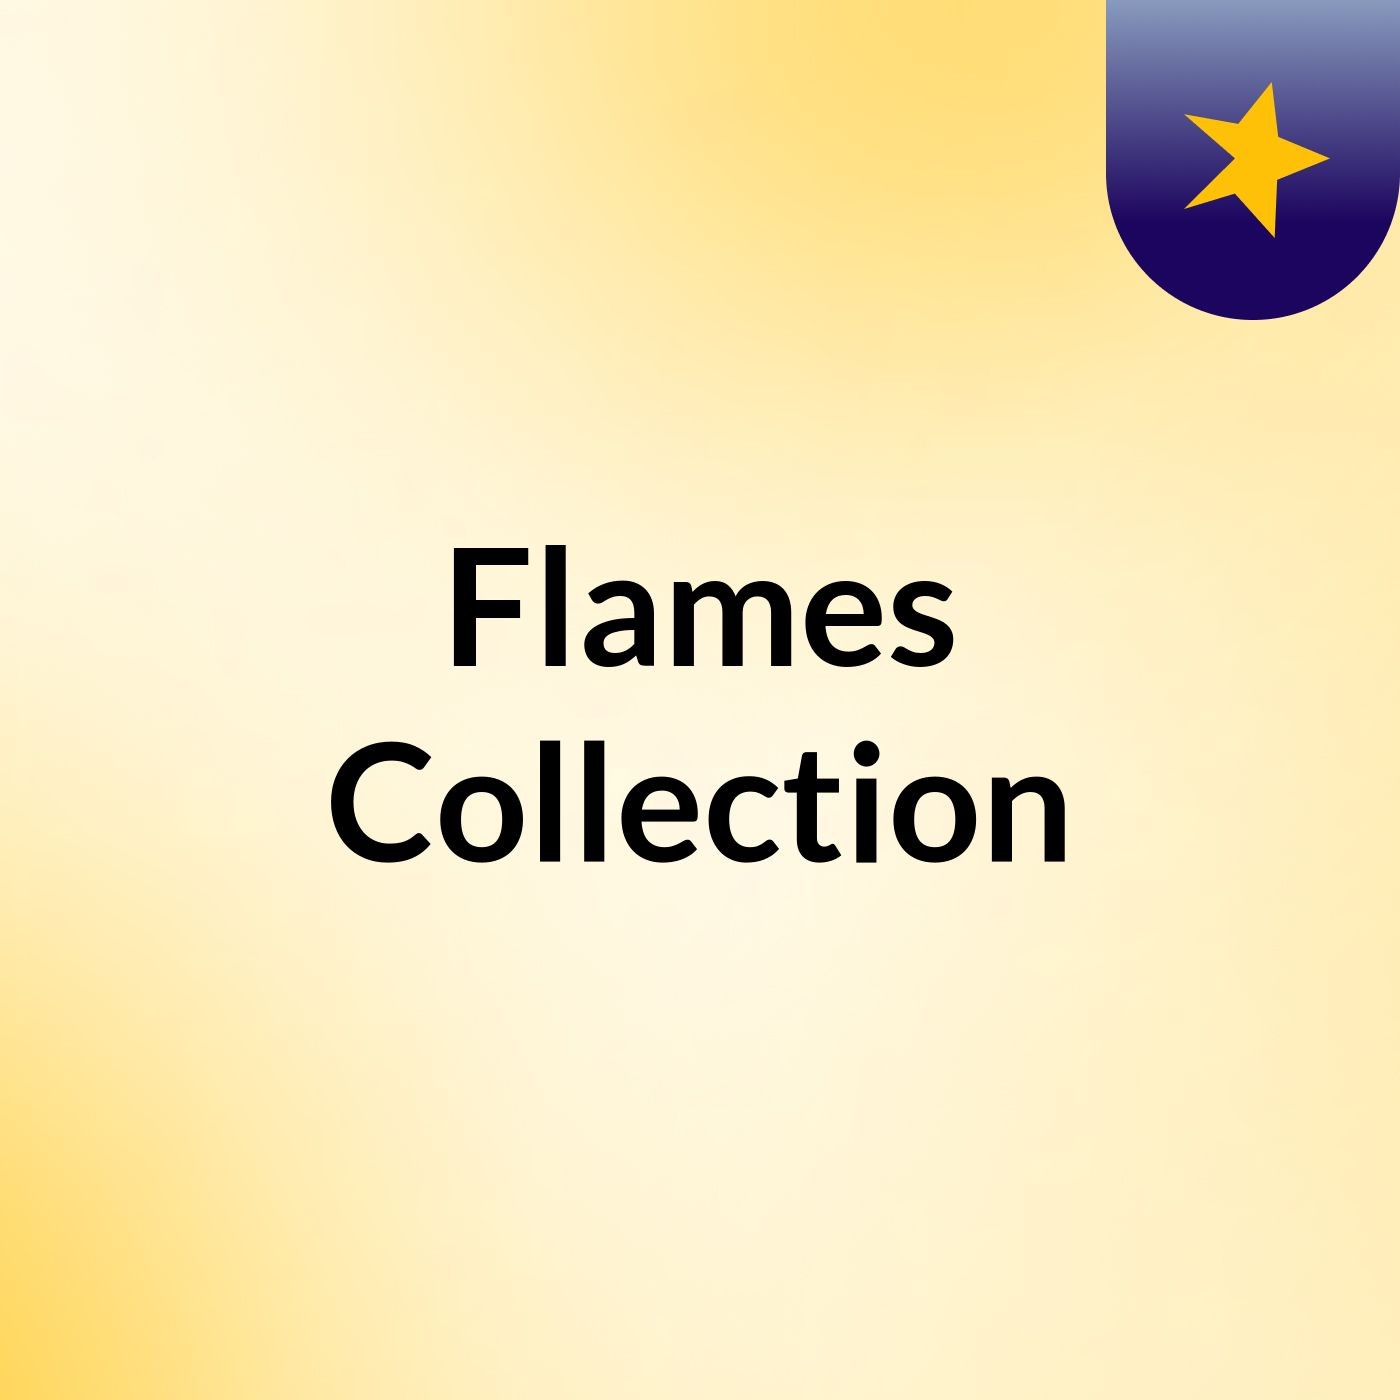 Flames Collection